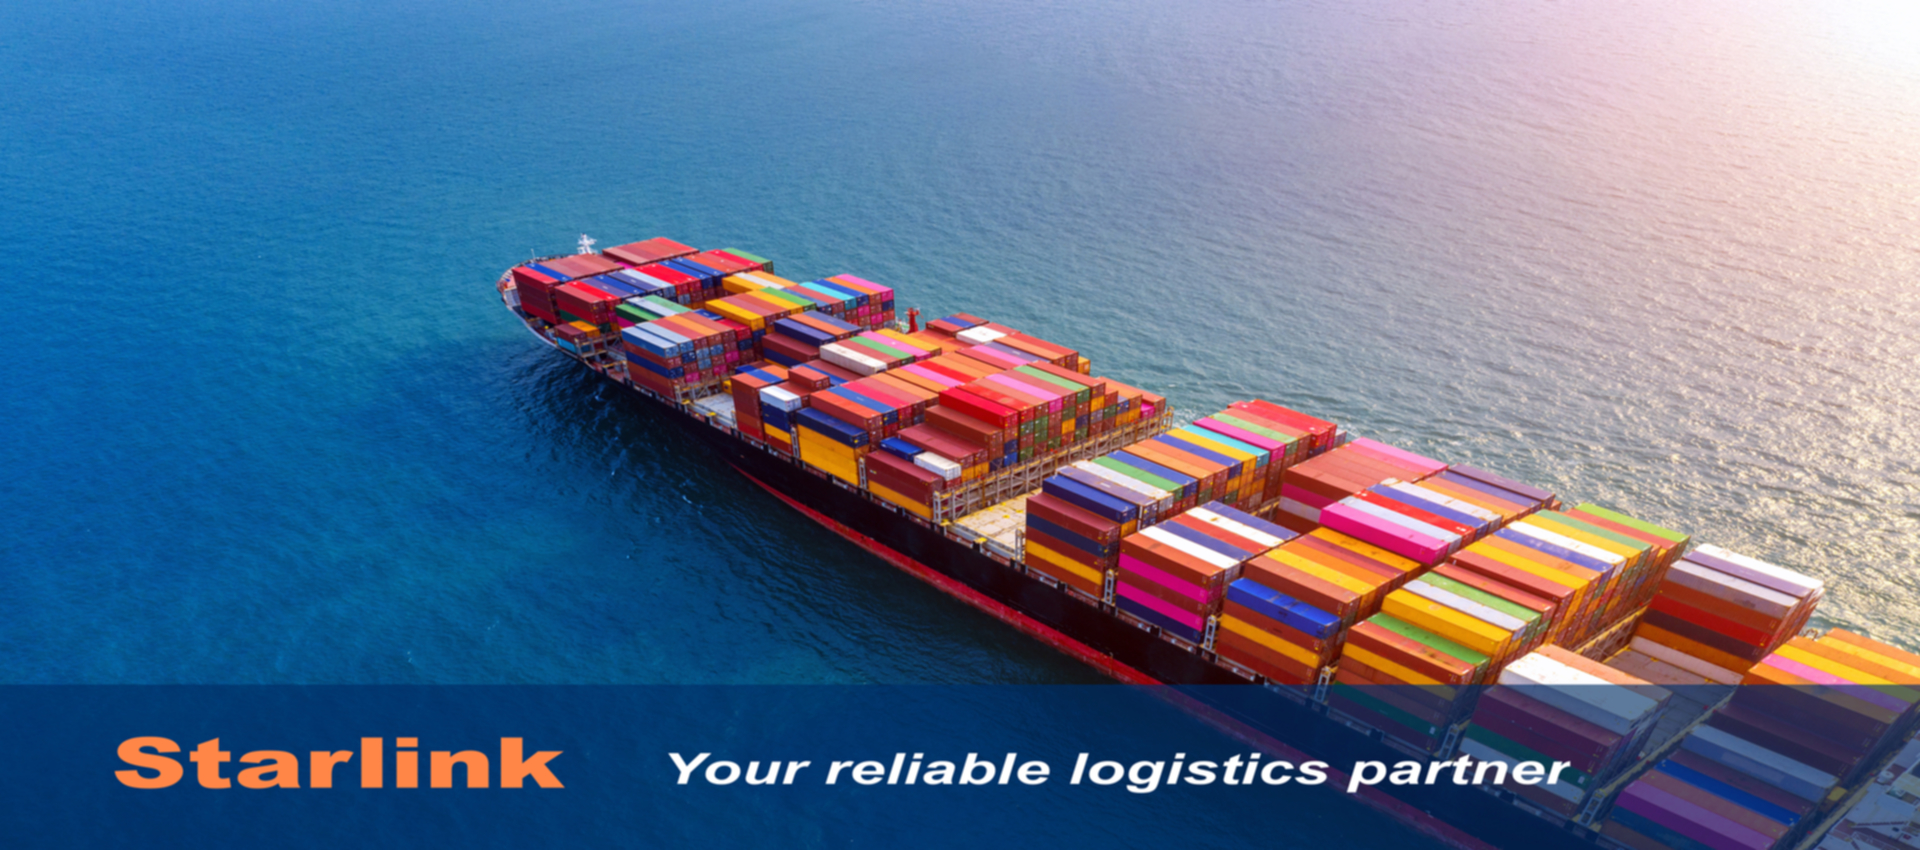 Starlink your reliable logistics partner